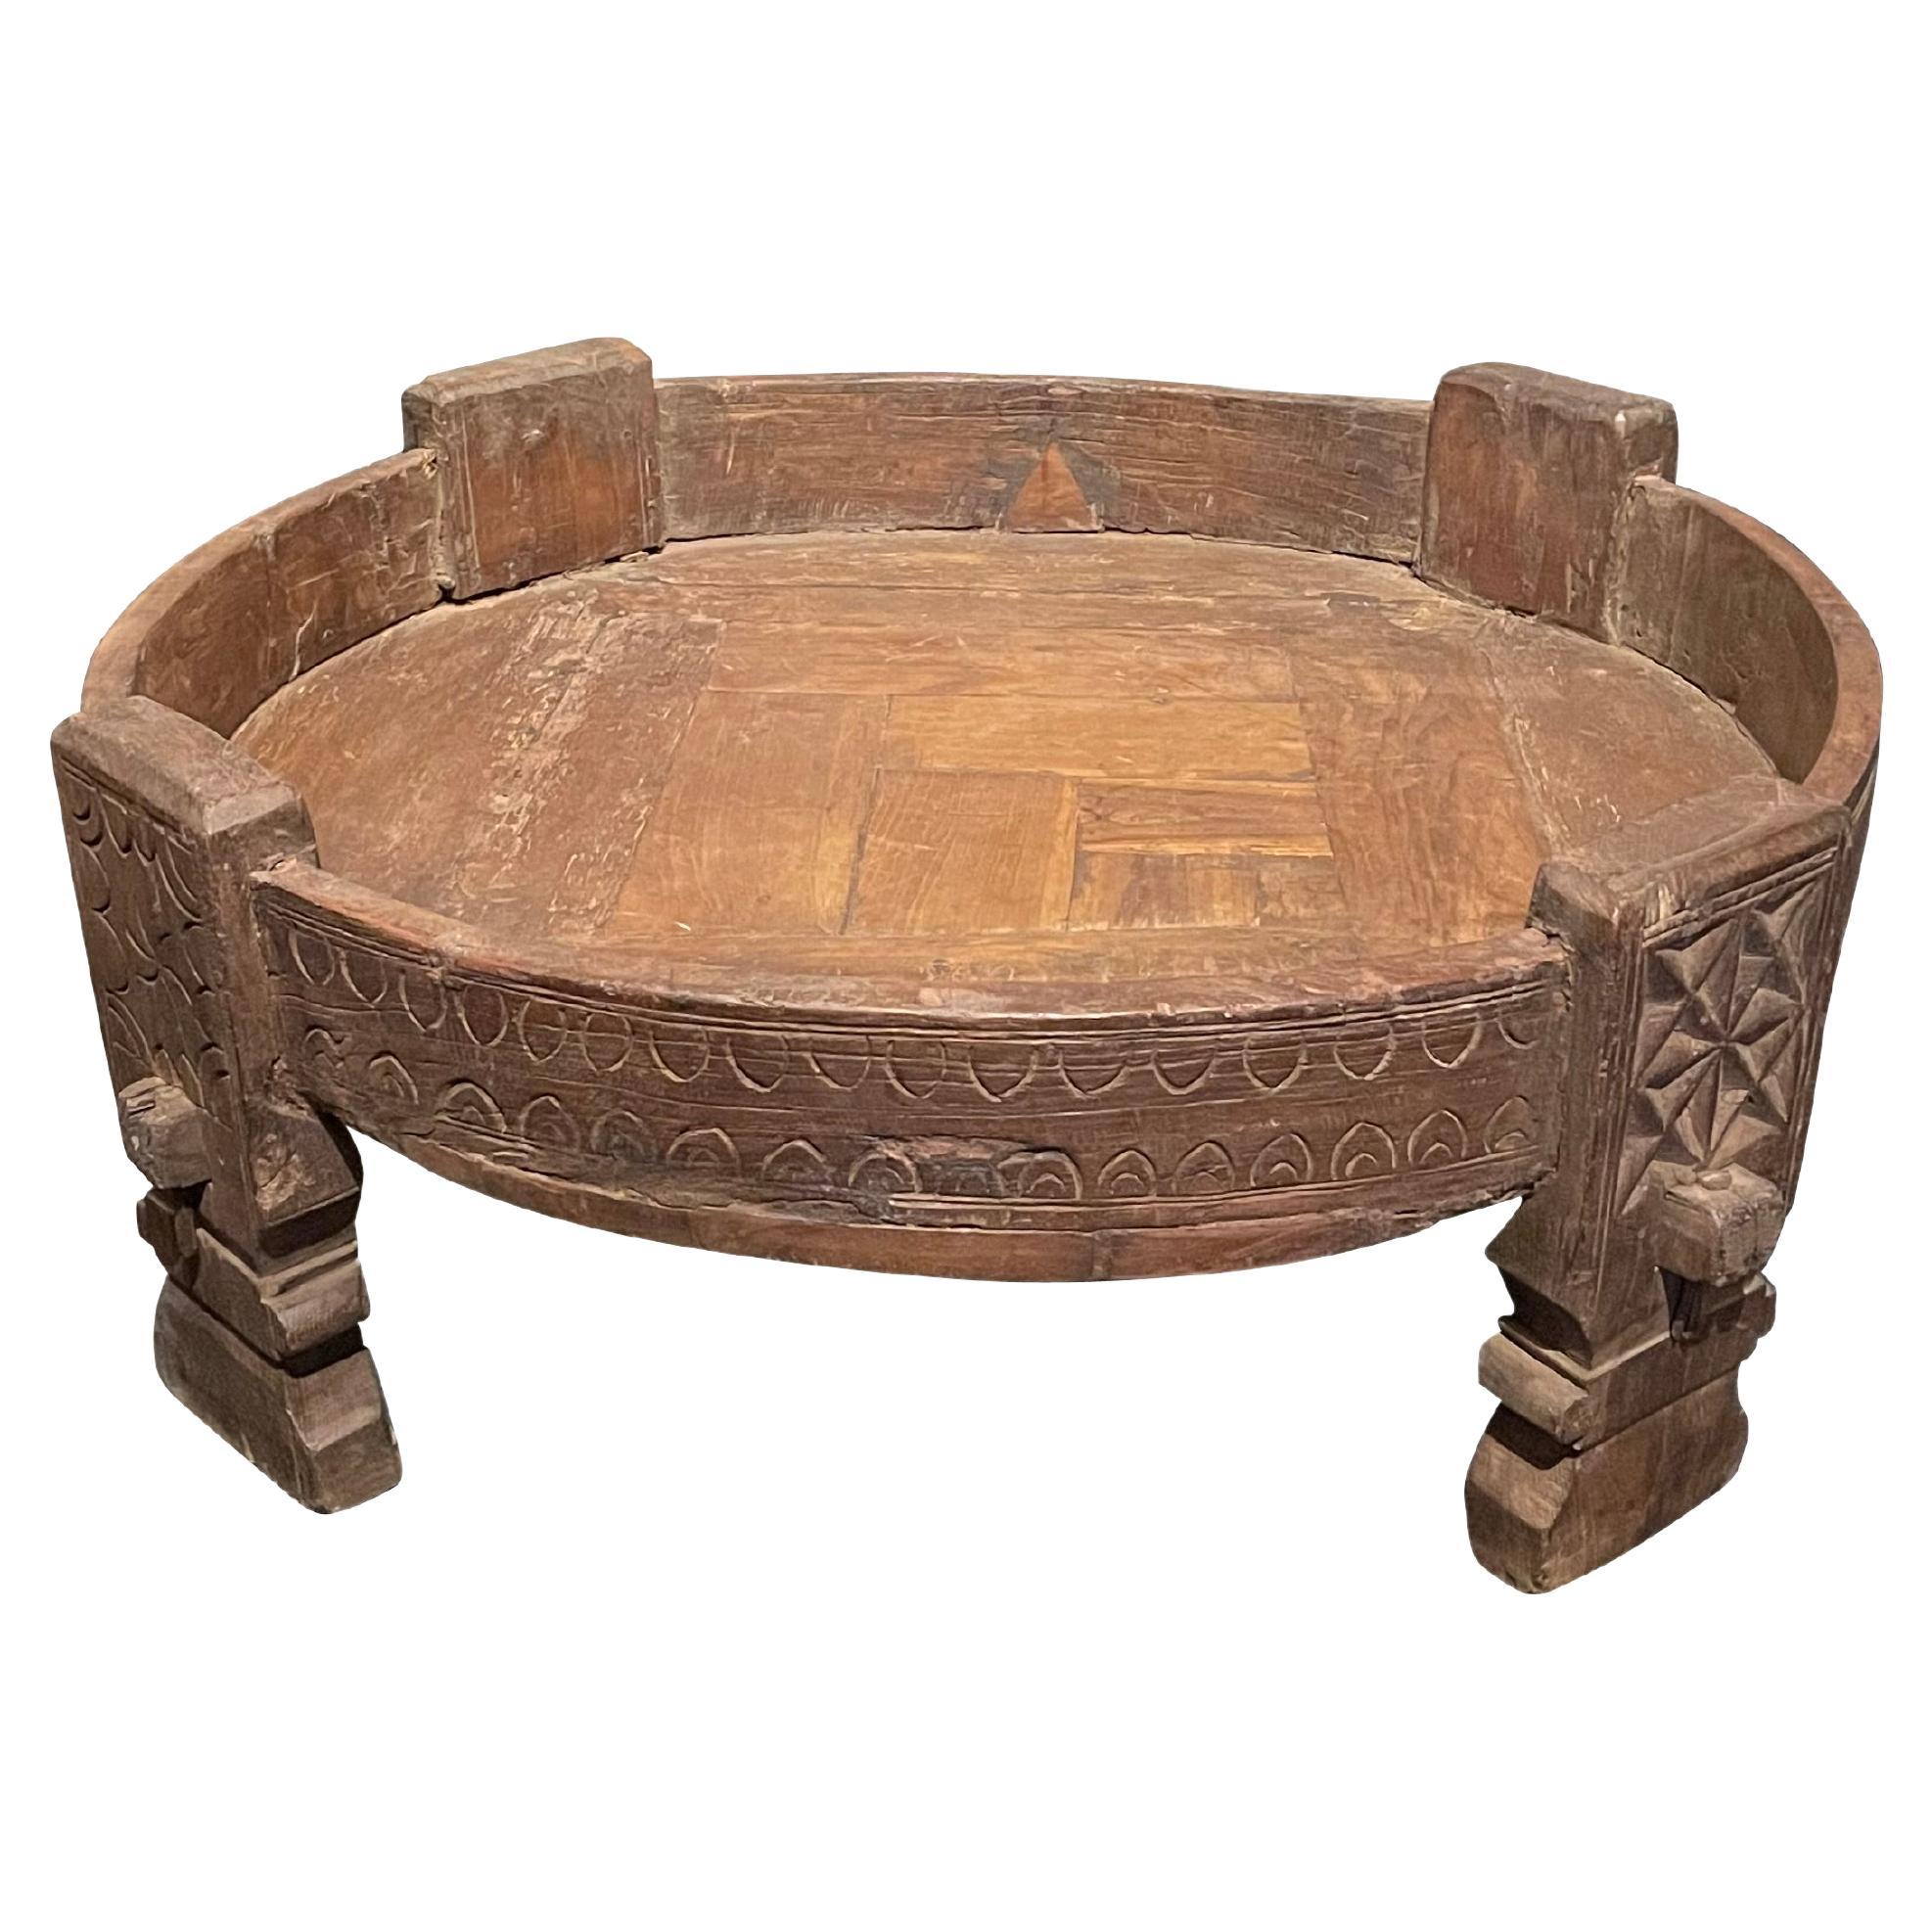 Extra Large Wooden Footed Bowl, India, 19th Century